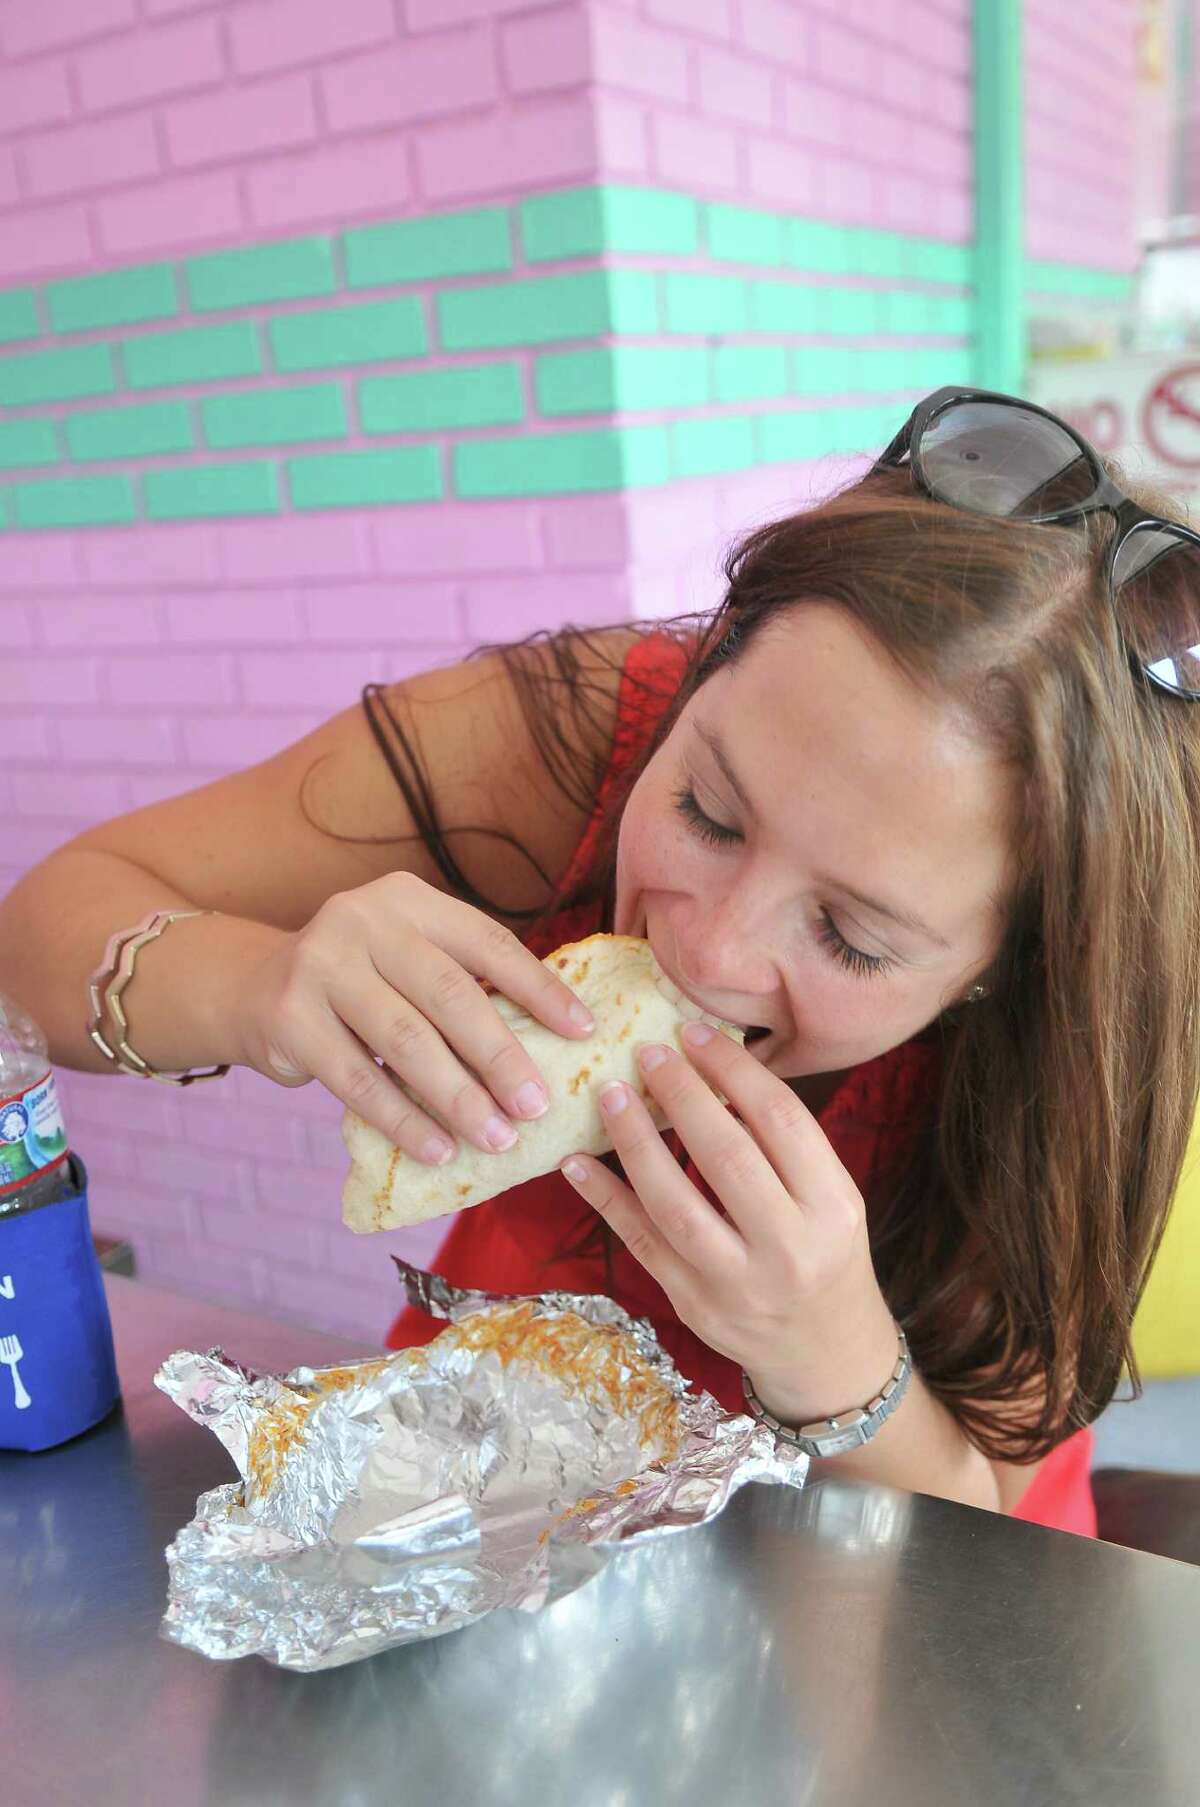 Tour attendee Aimee Witherspoon eating a carne guisada taco at Brothers Taco House.